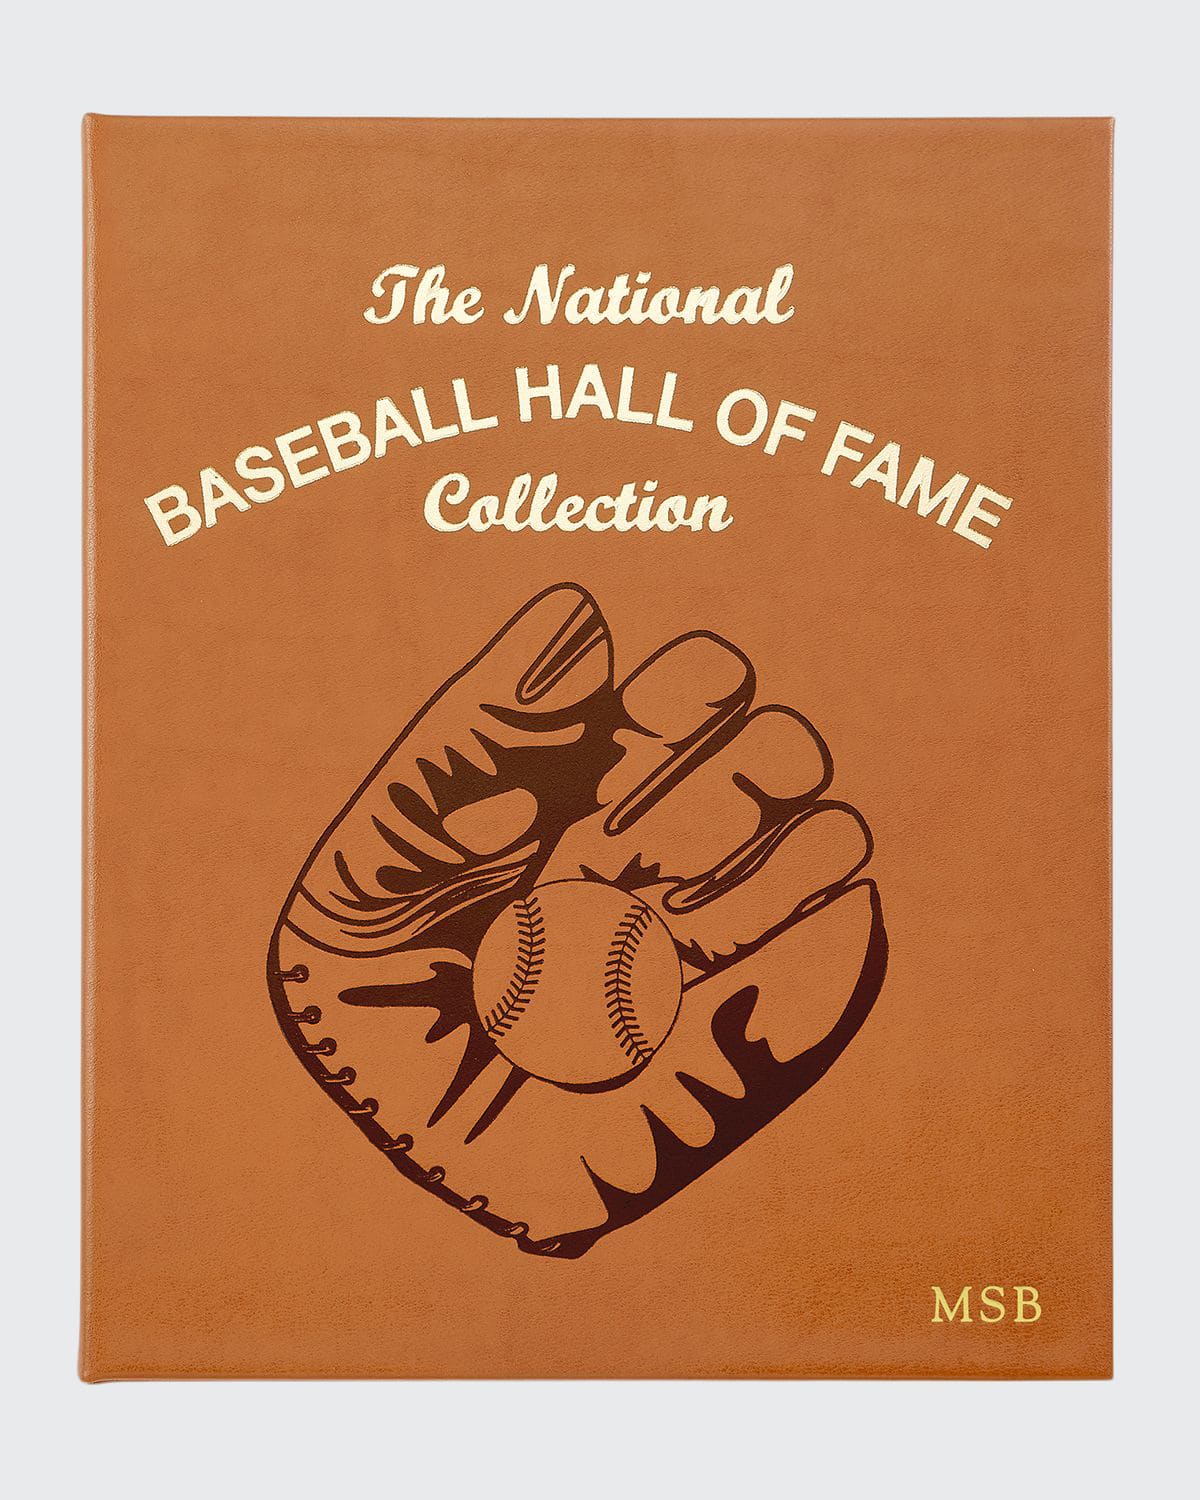 The National Baseball Hall of Fame Collection Book by James Buckley